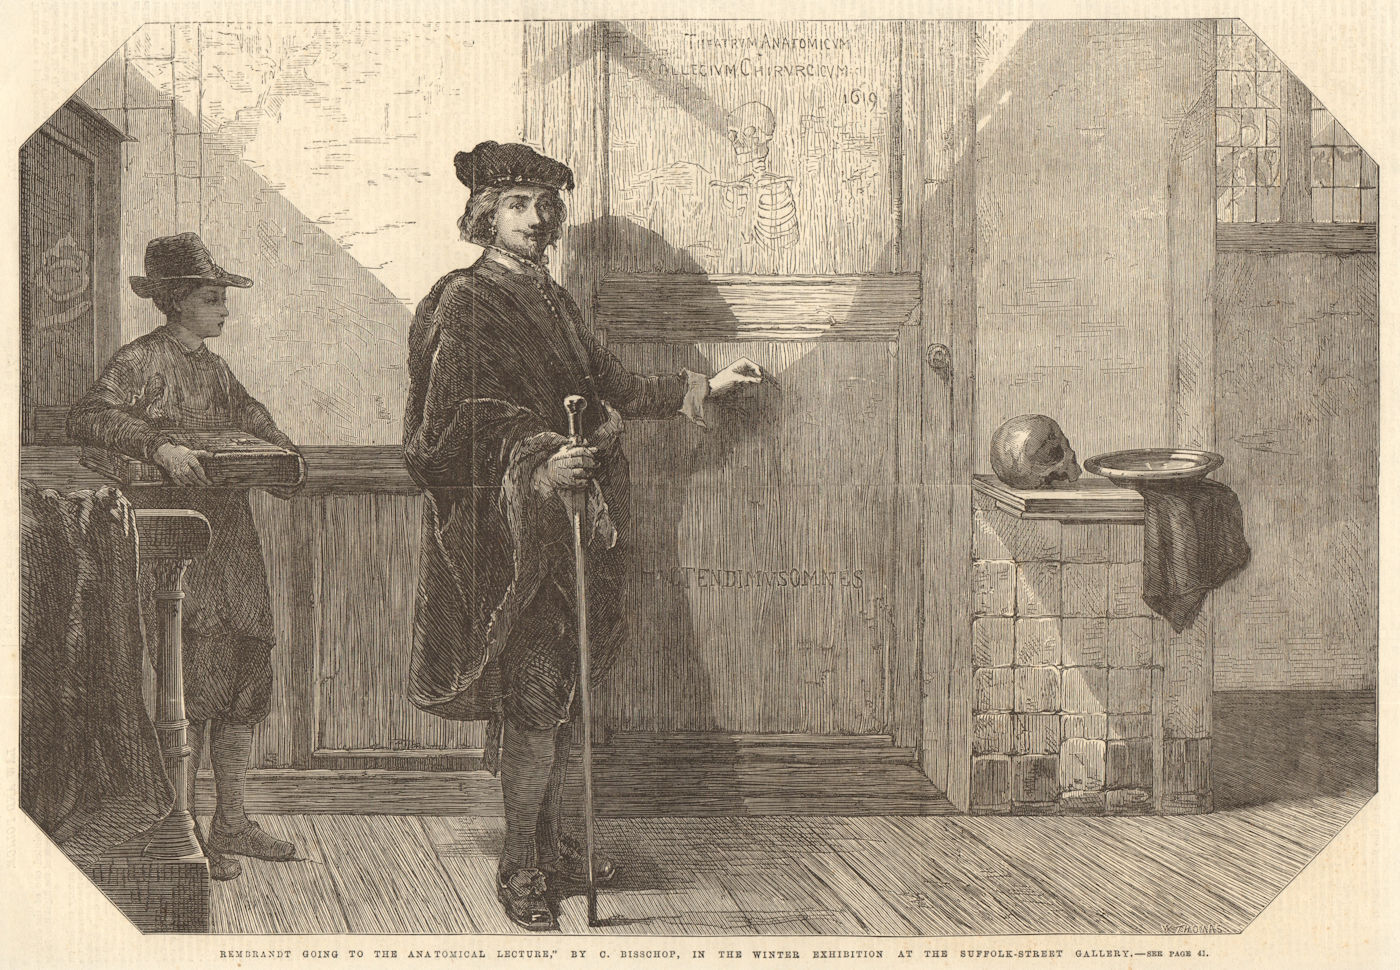 Associate Product "Rembrandt going to the anatomical lecture", by C. Bisschop. Science 1867